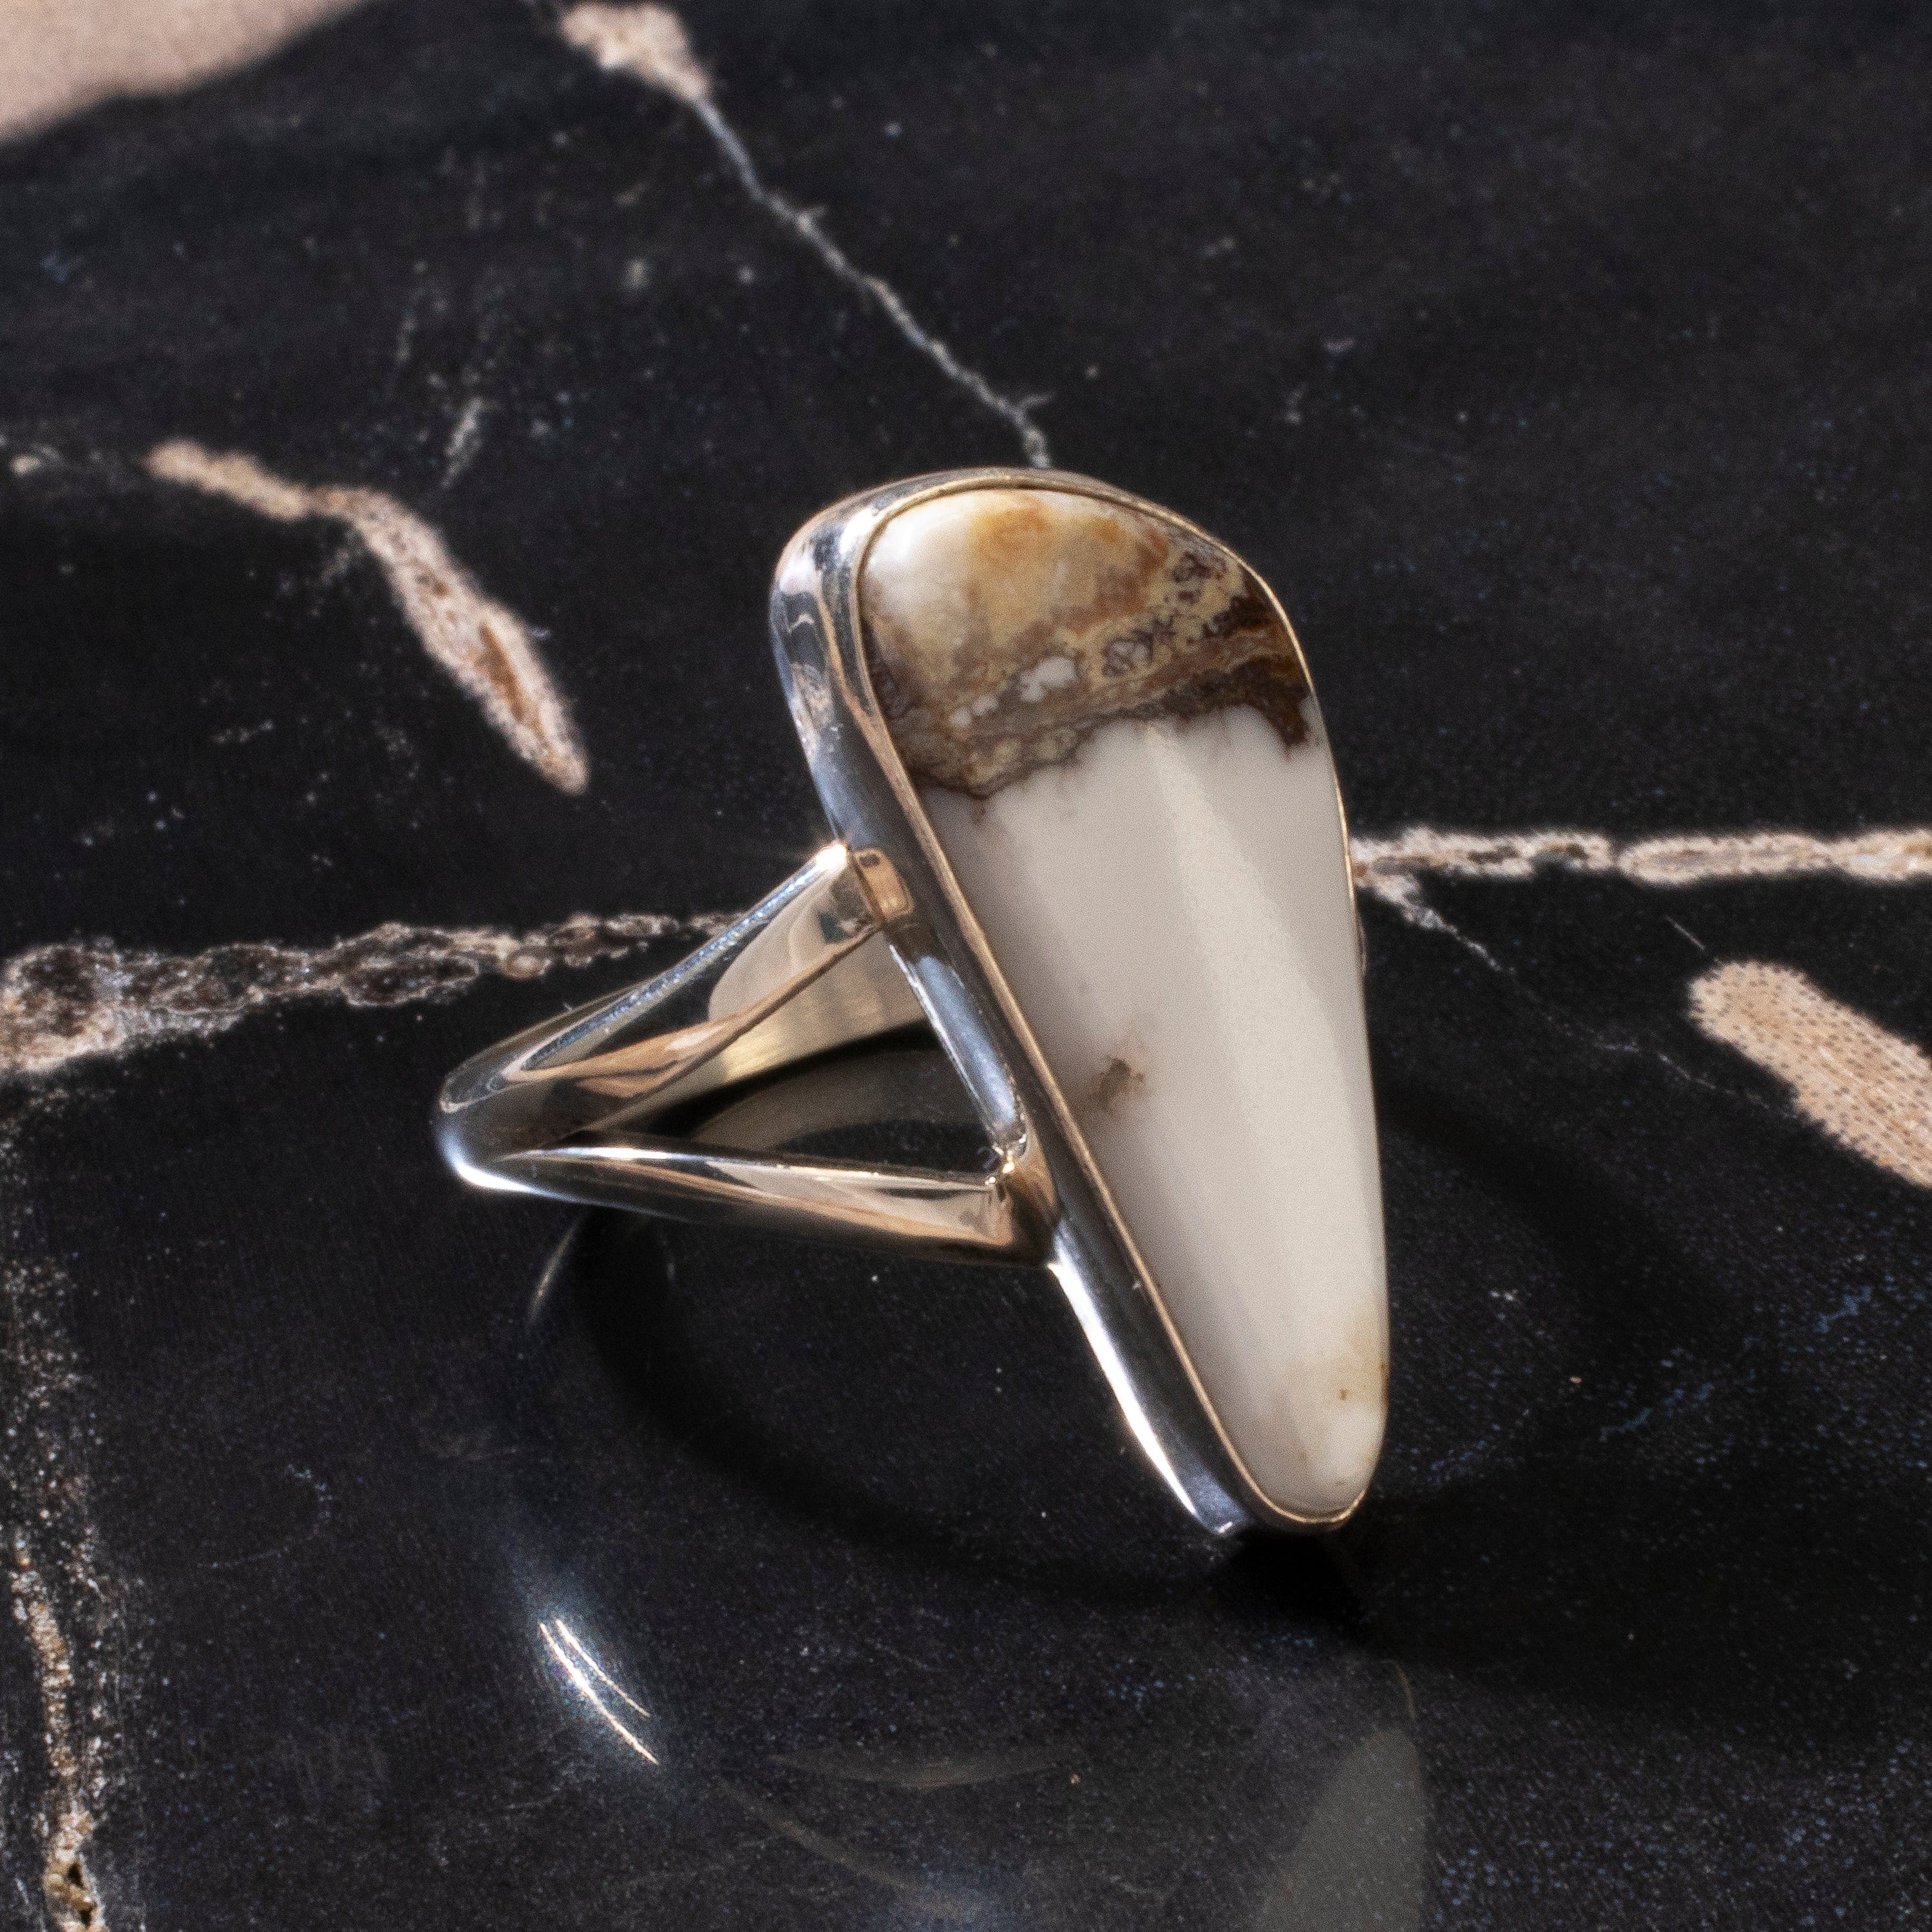 Kalifano Native American Jewelry 7 White Buffalo Turquoise Navajo USA Native American Made 925 Sterling Silver Ring NAR500.087.7